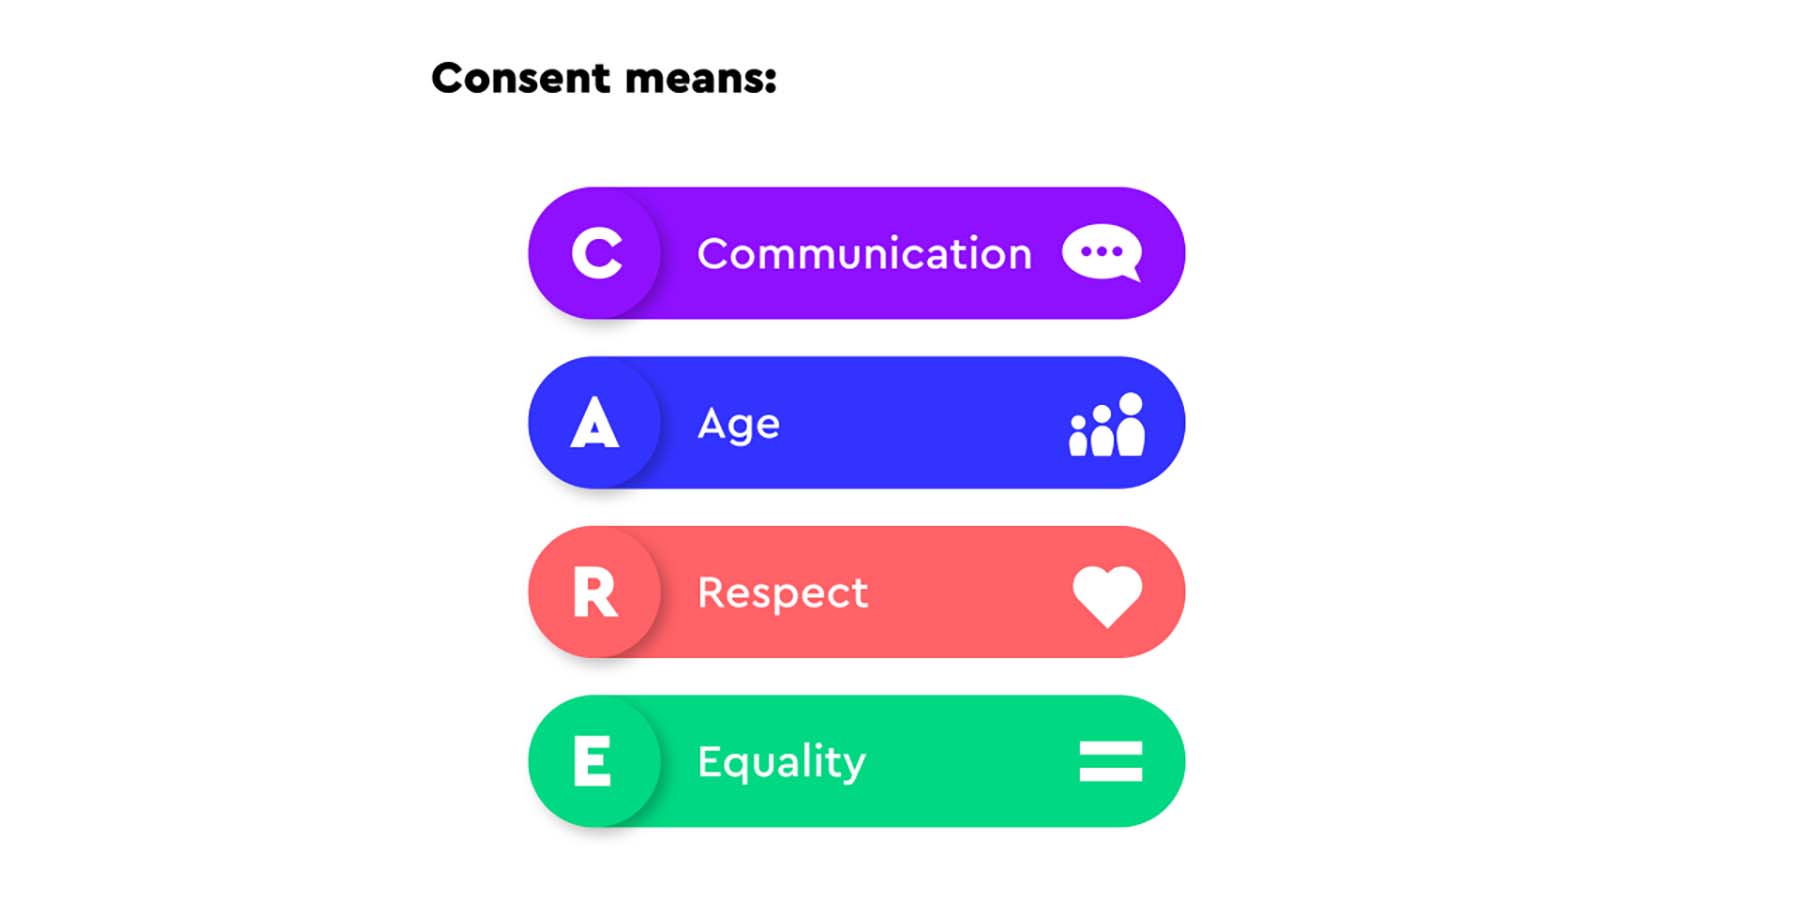 Care Factor. Consent means: C, COMMUNICATION, A, AGE, R, RESPECT, E, EQUALITY